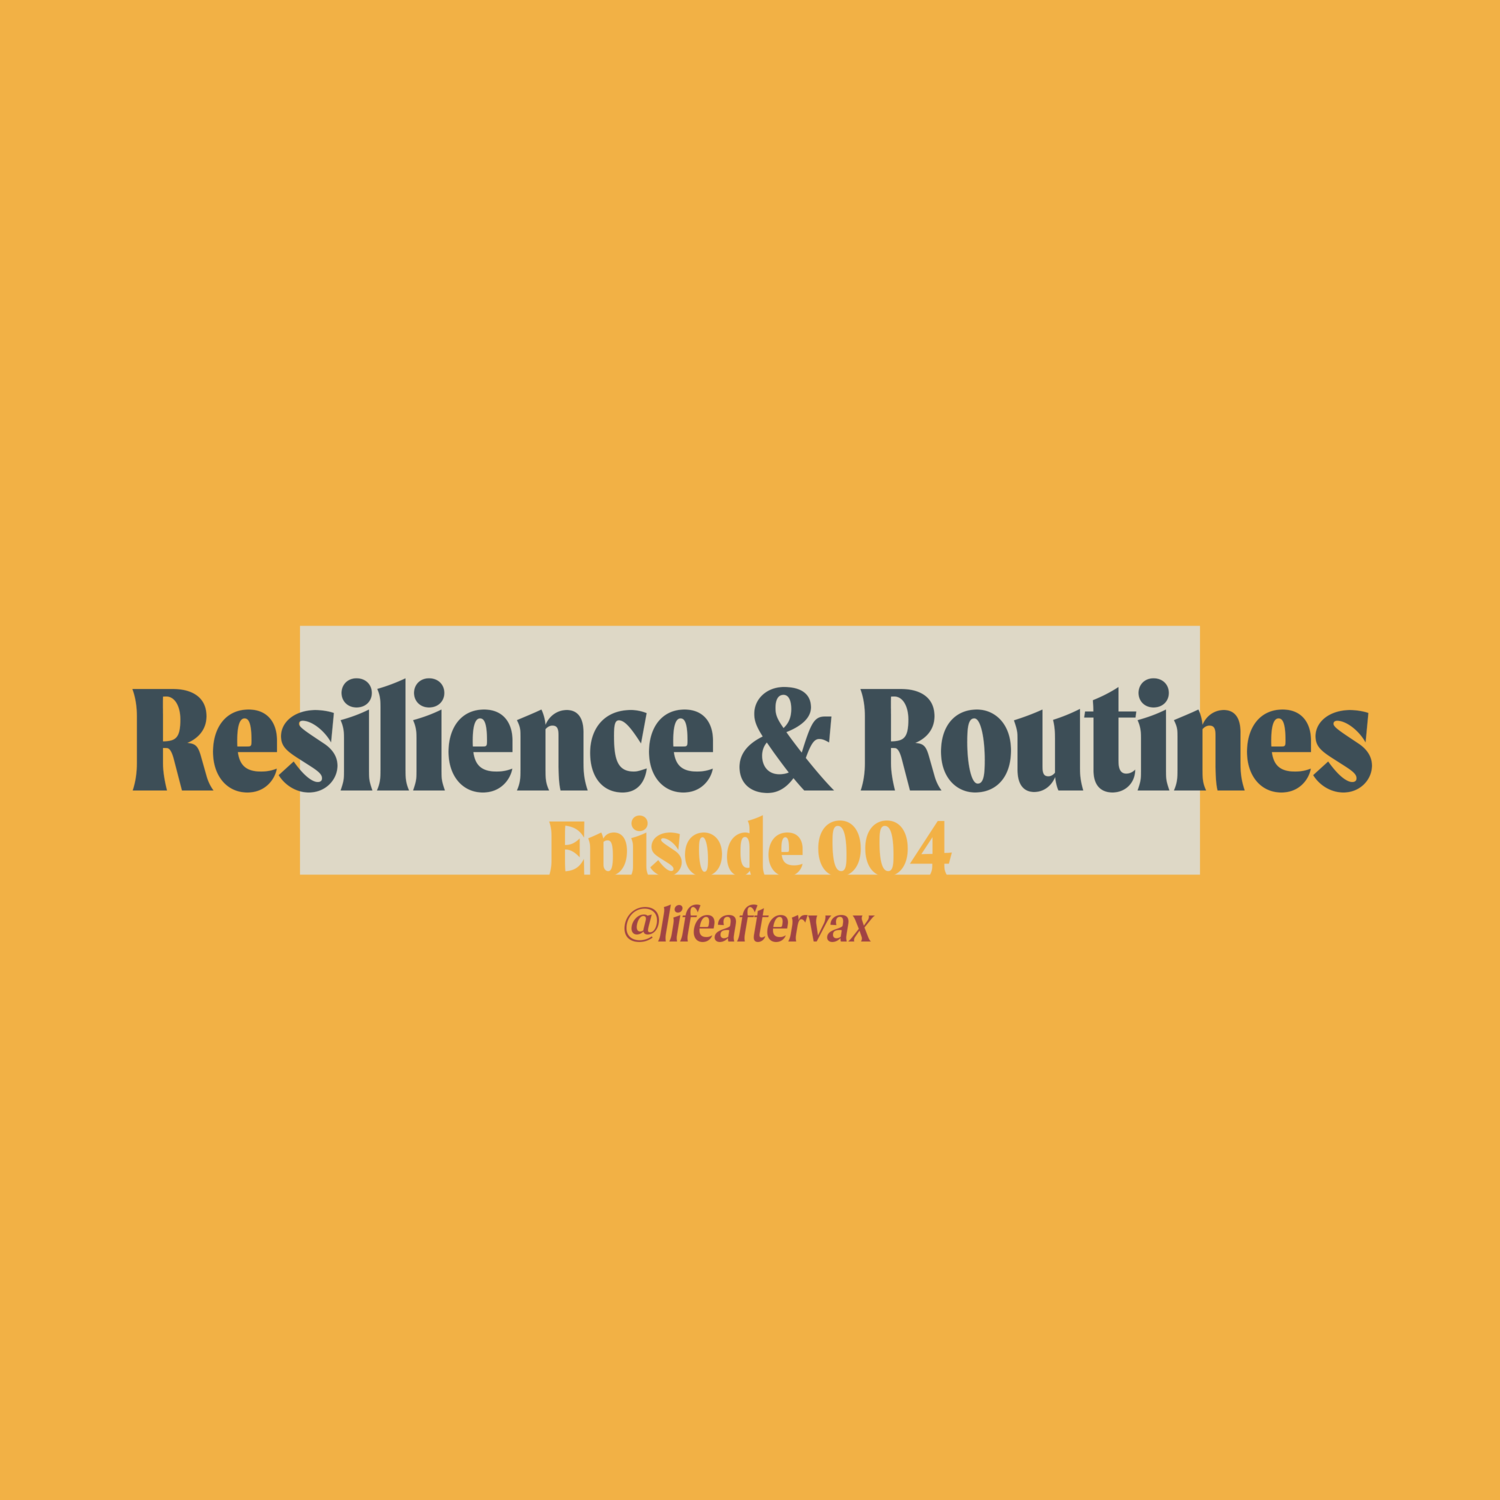 Episode 004 - Resilience & Routines